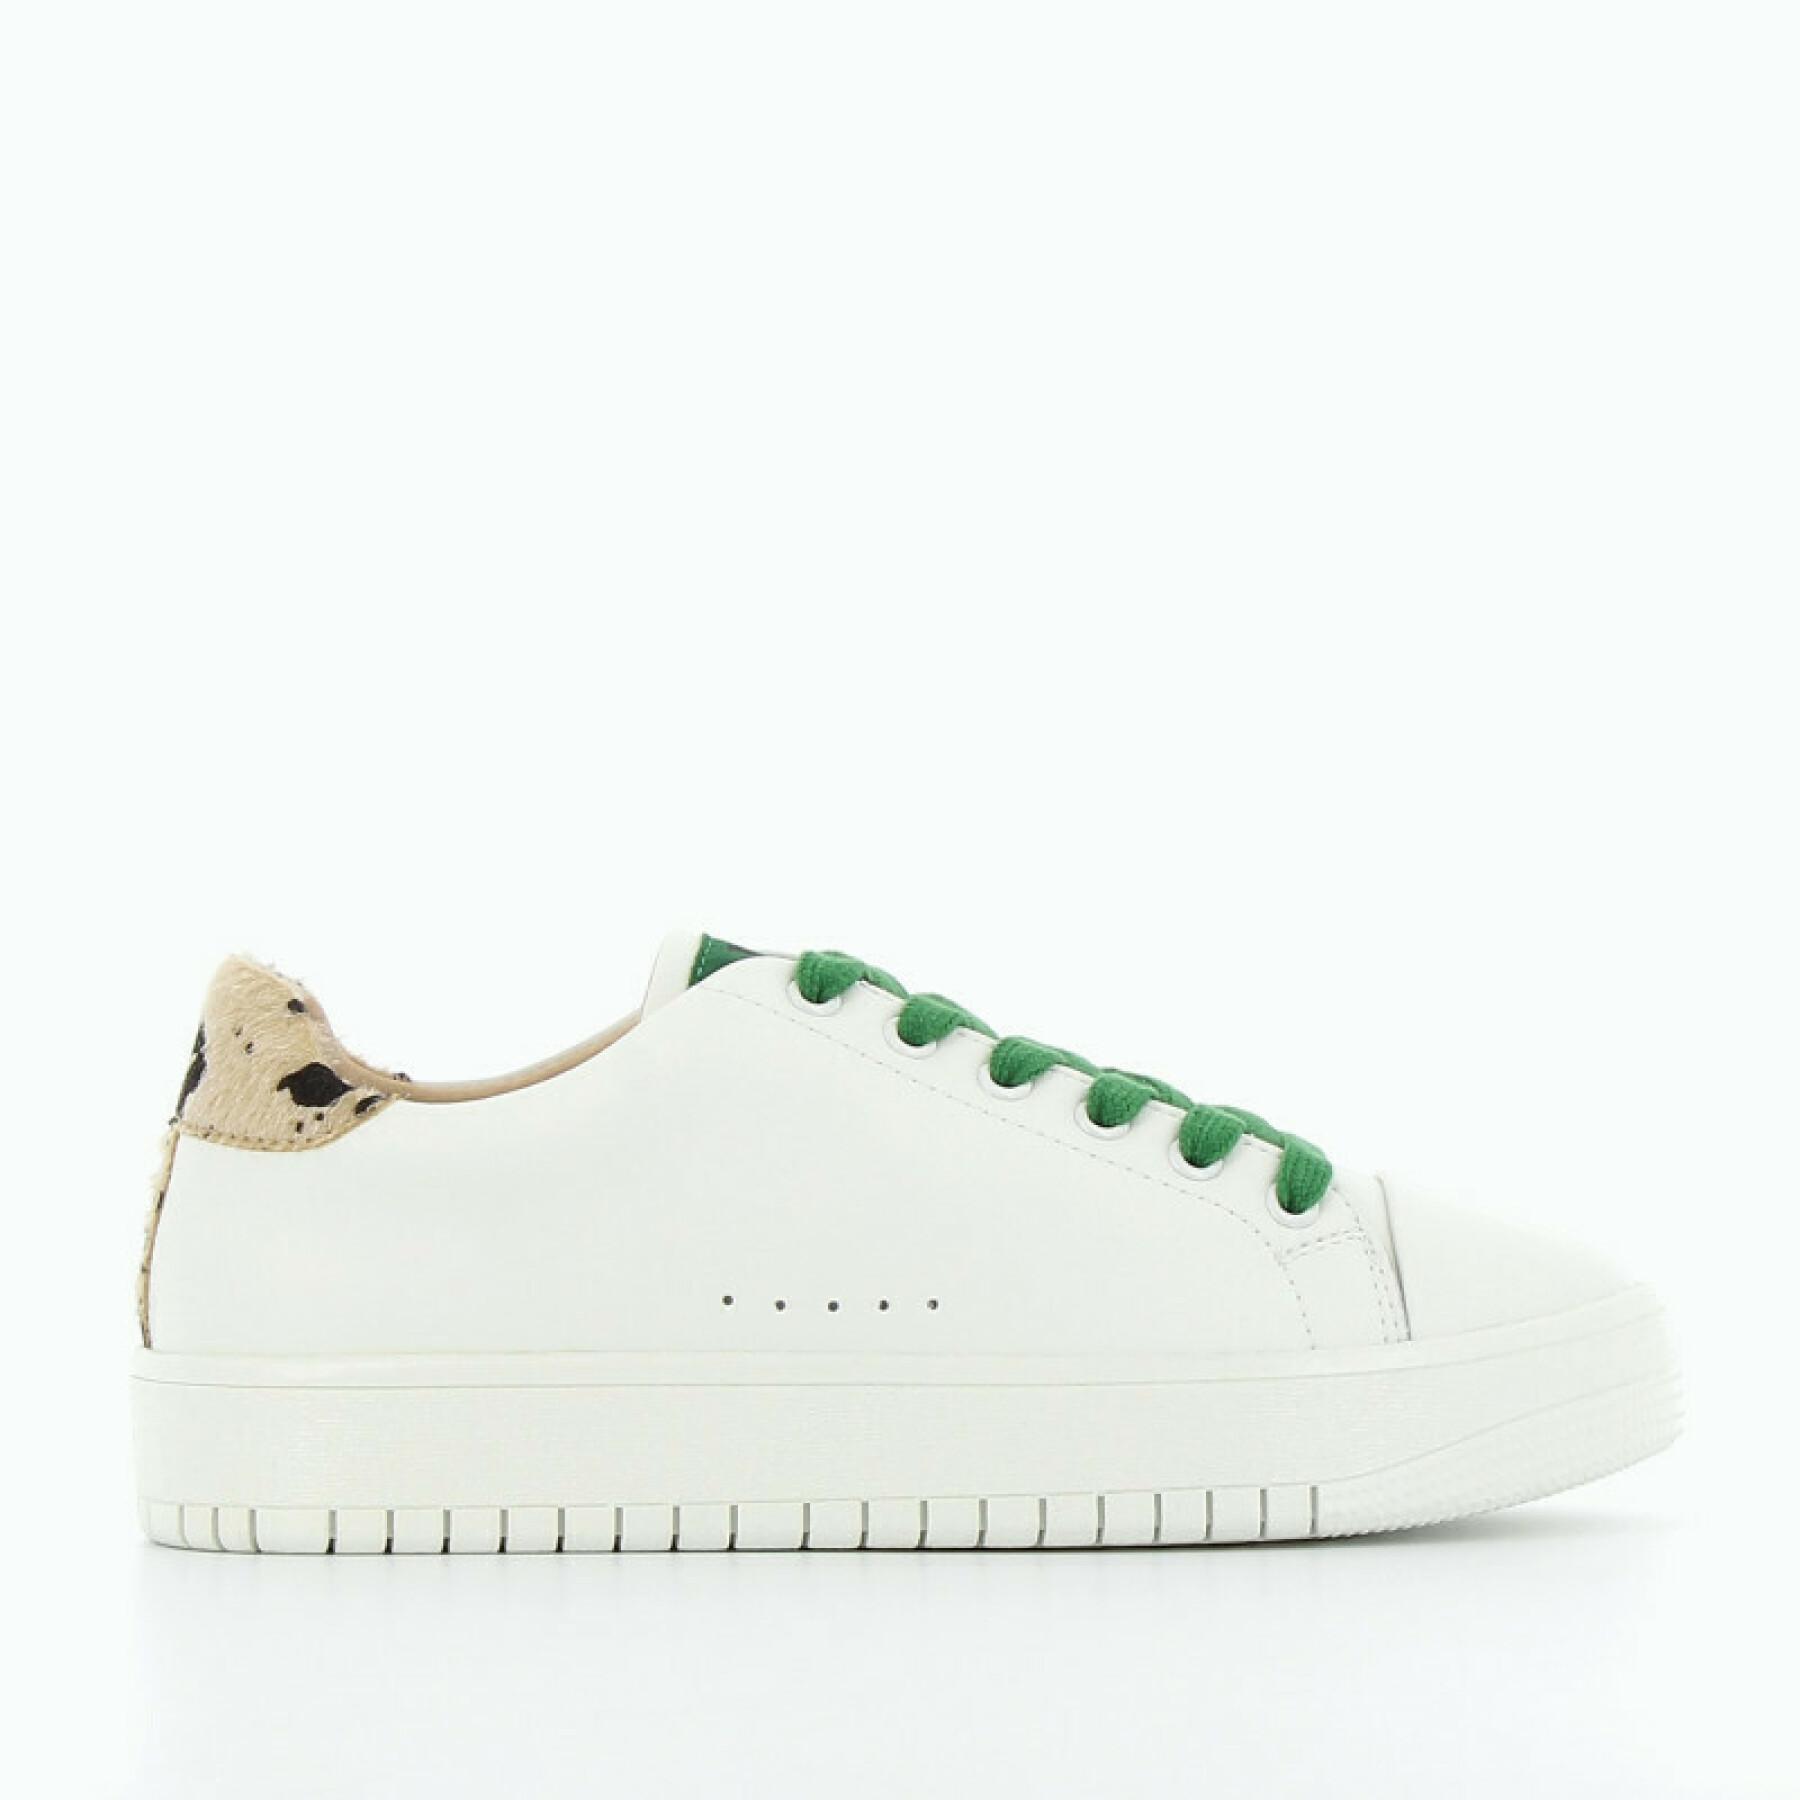 Women's sneakers Vanessa Wu blanches à lacets verts